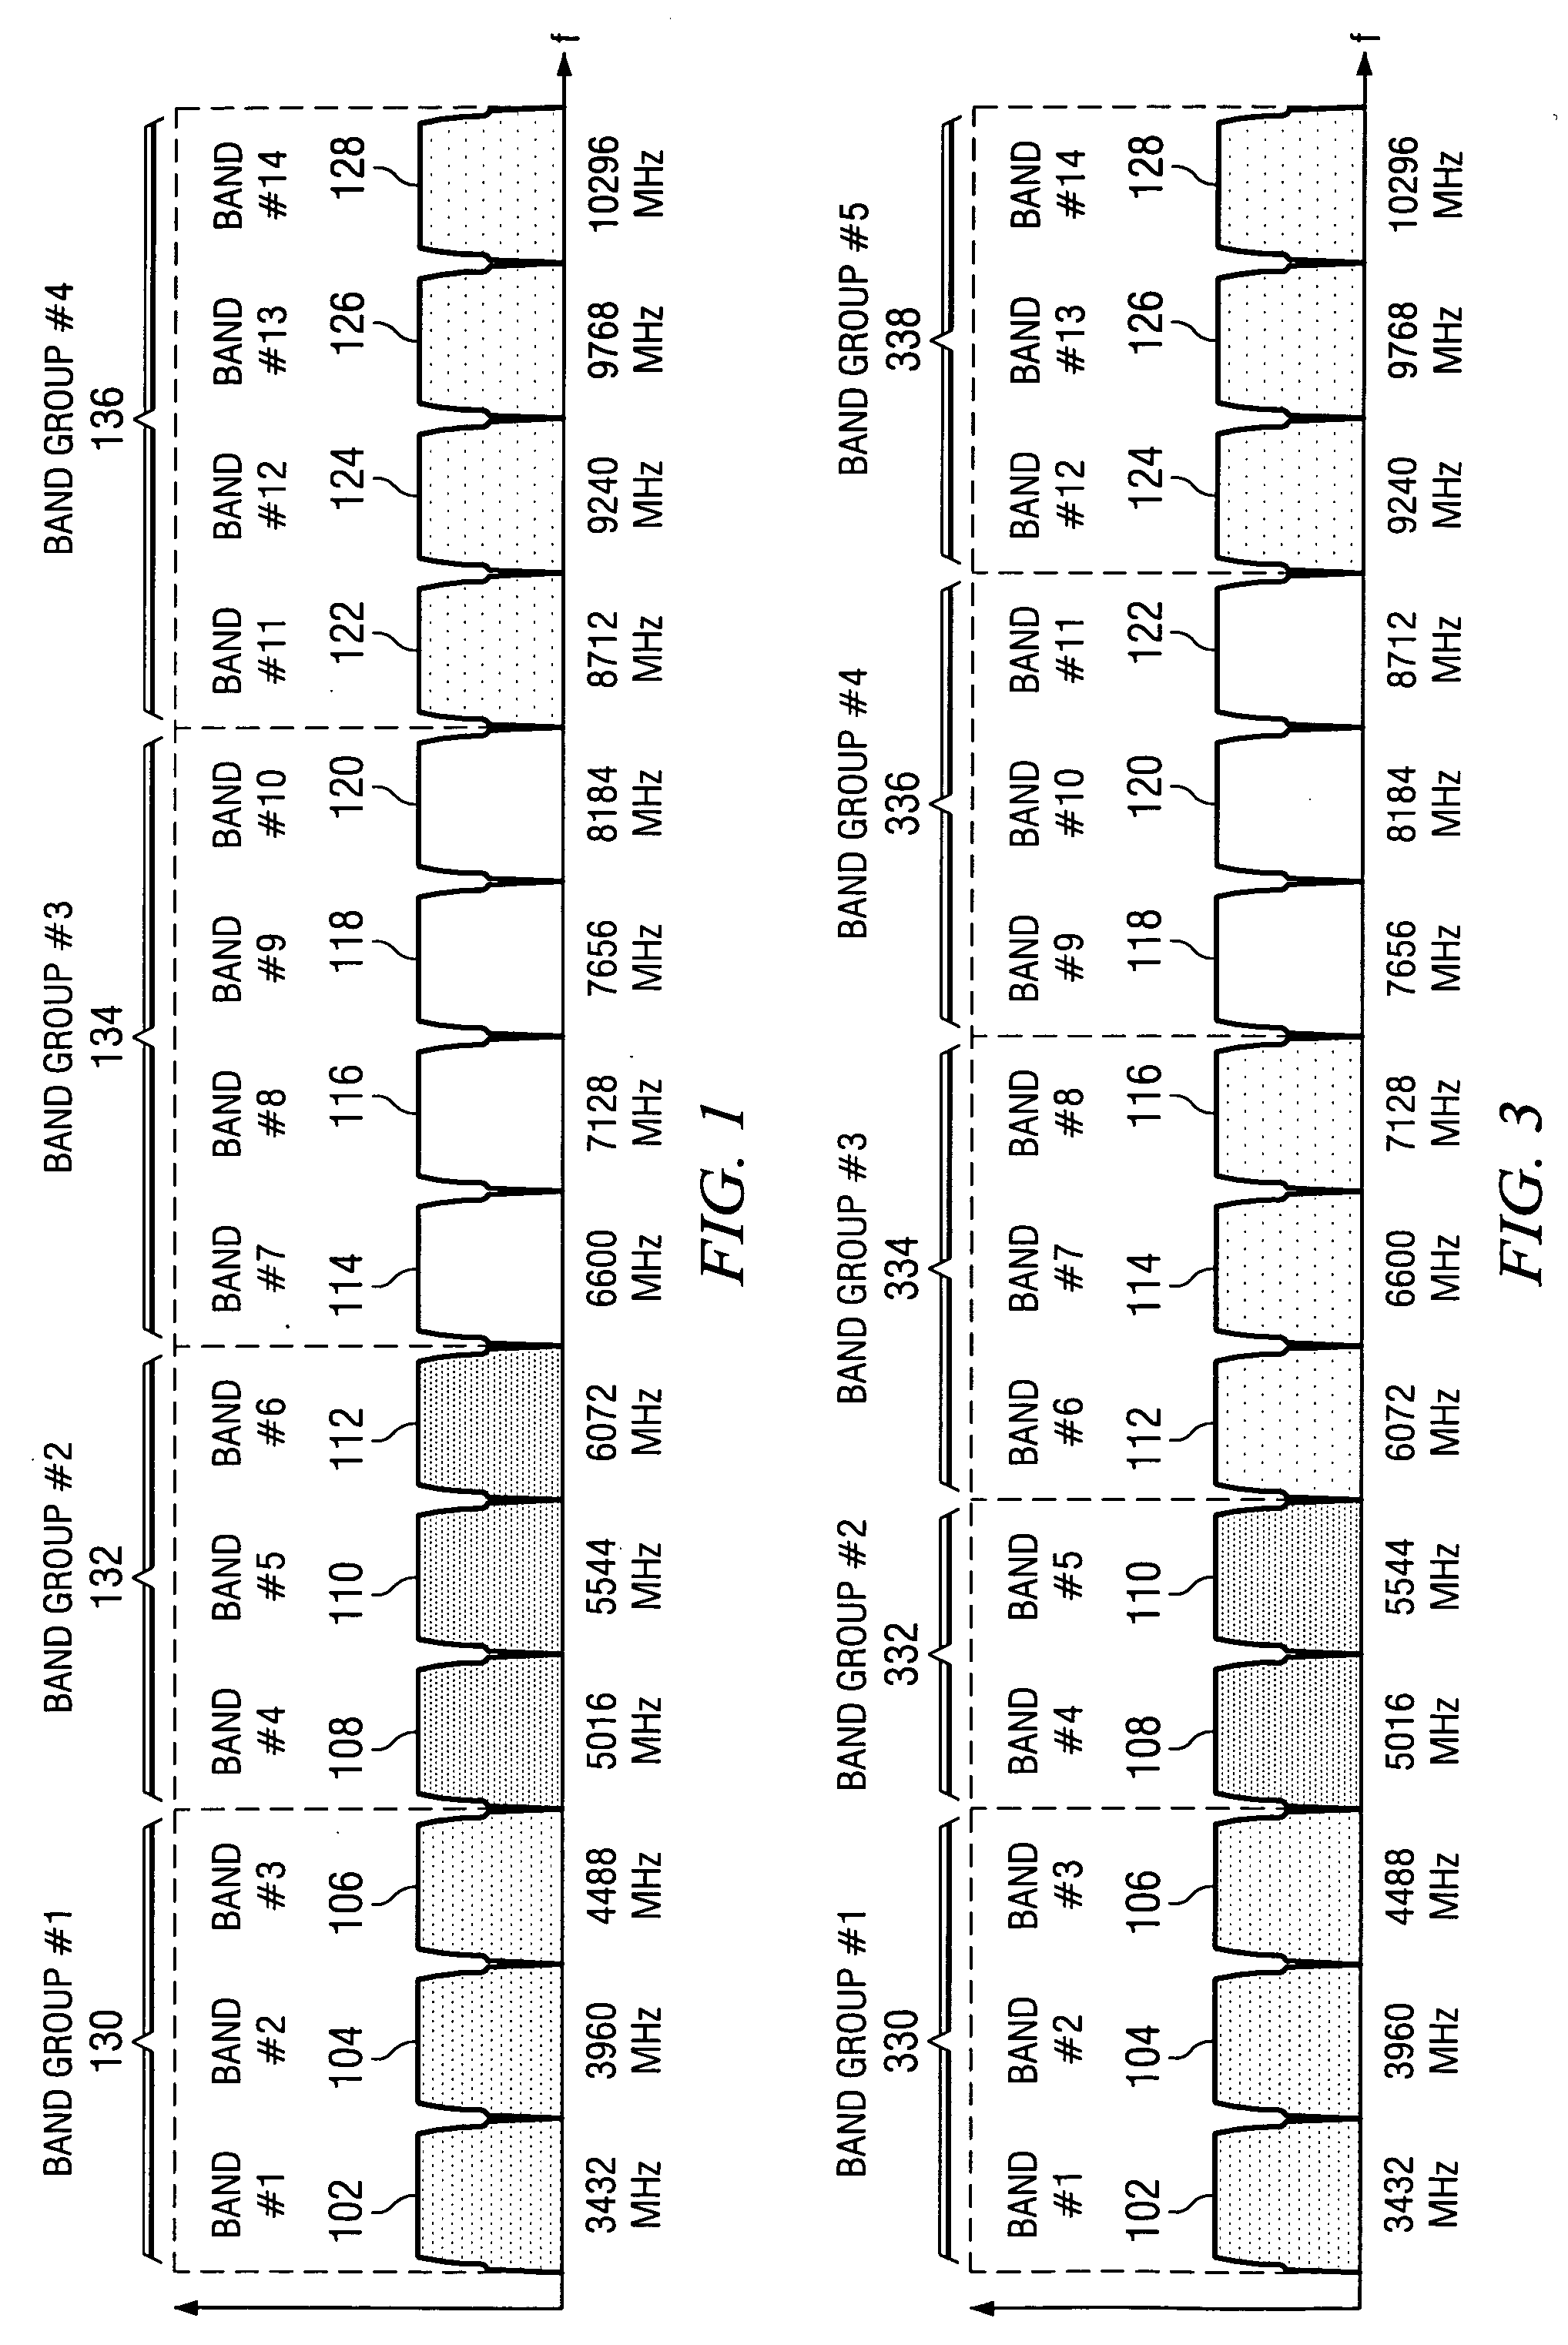 System and method for channelization and data multiplexing in a wireless communication network